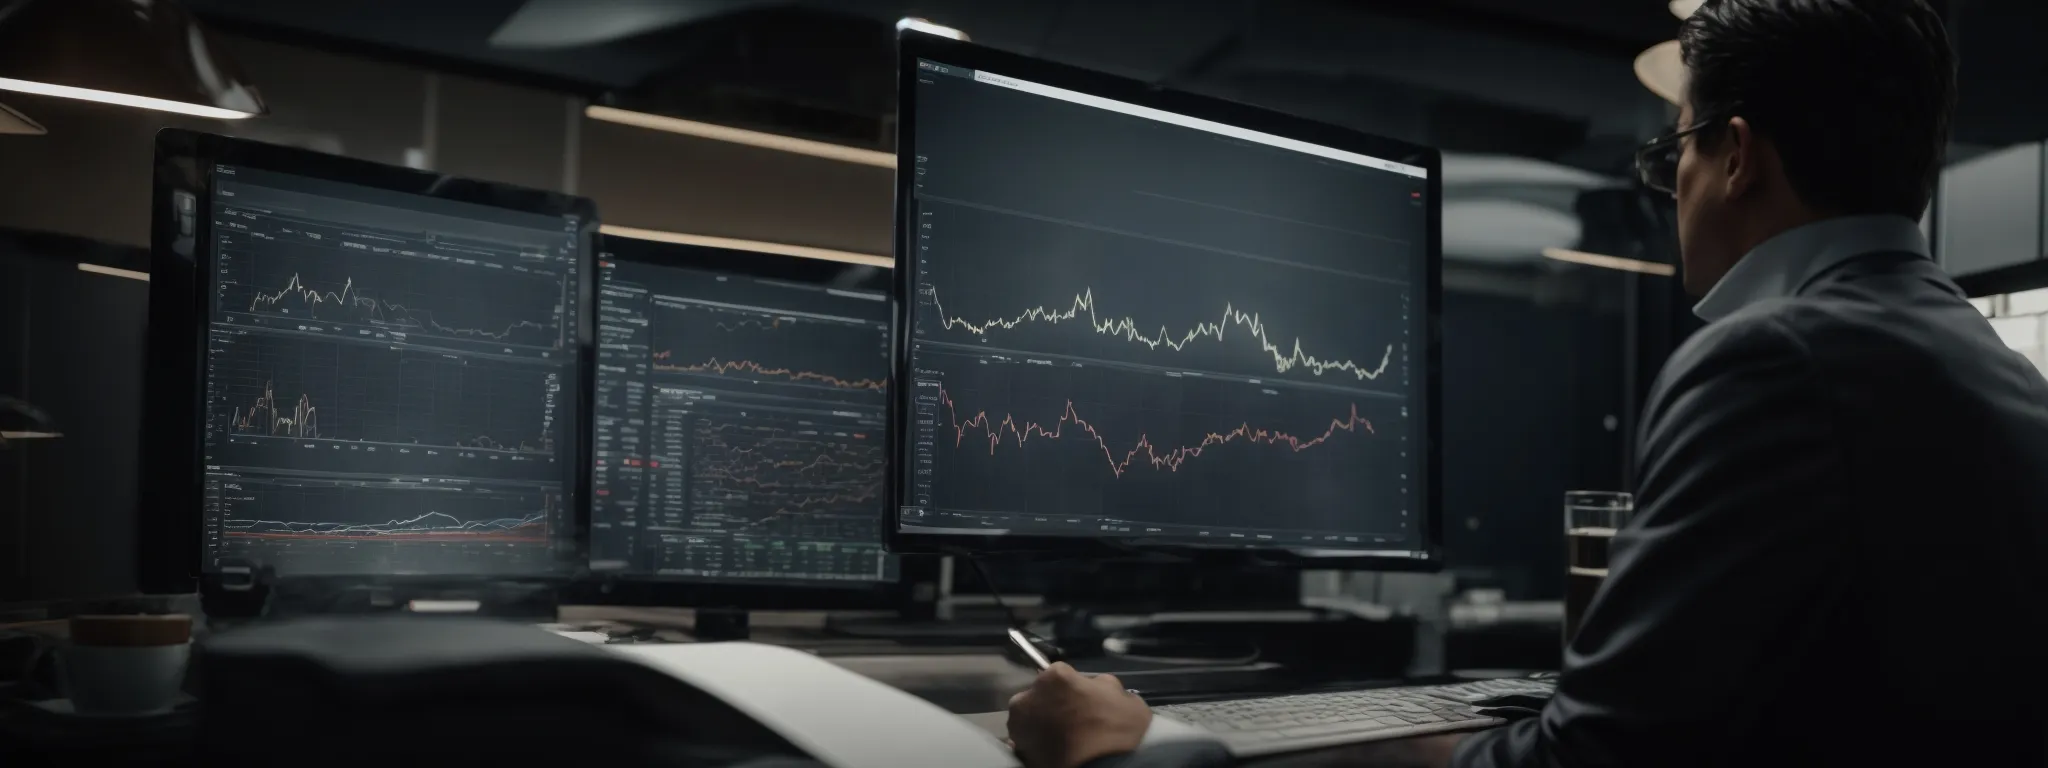 a businessperson analyzing a graph showing cost and revenue trends at their workstation.